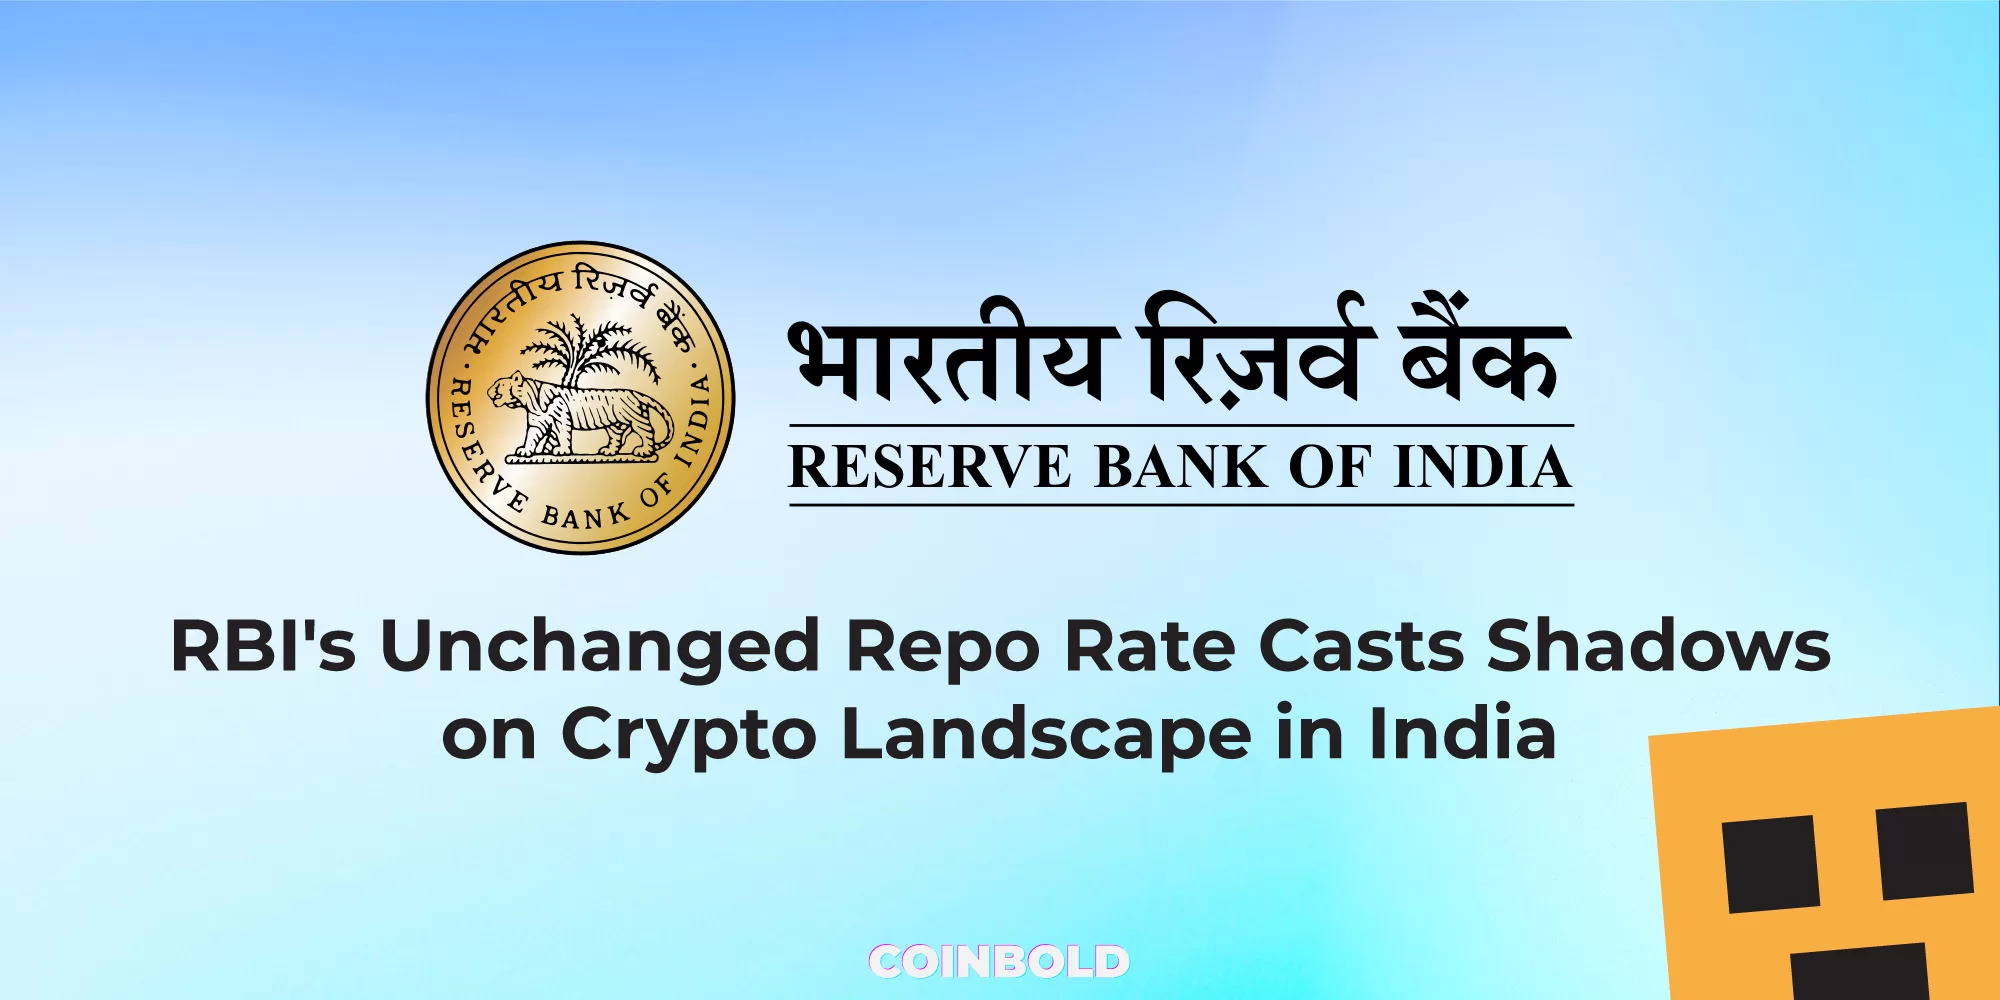 RBI's Unchanged Repo Rate Casts Shadows on Crypto Landscape in India